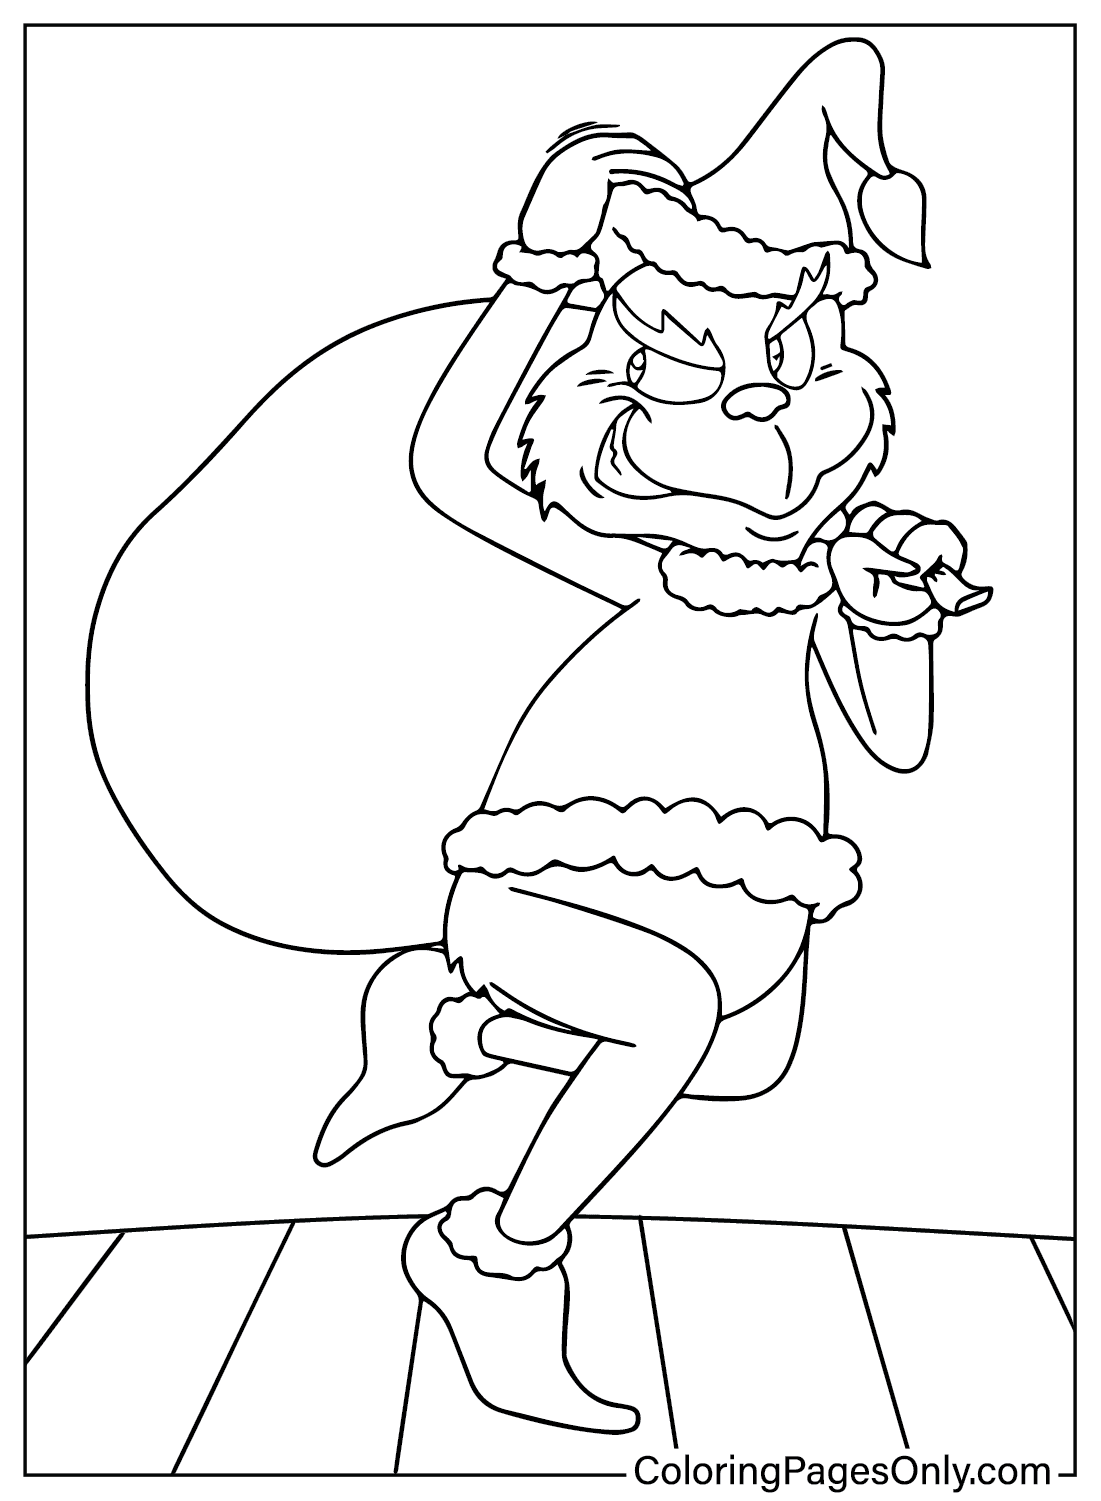 Grinch Coloring Page Free Printable from Grinch